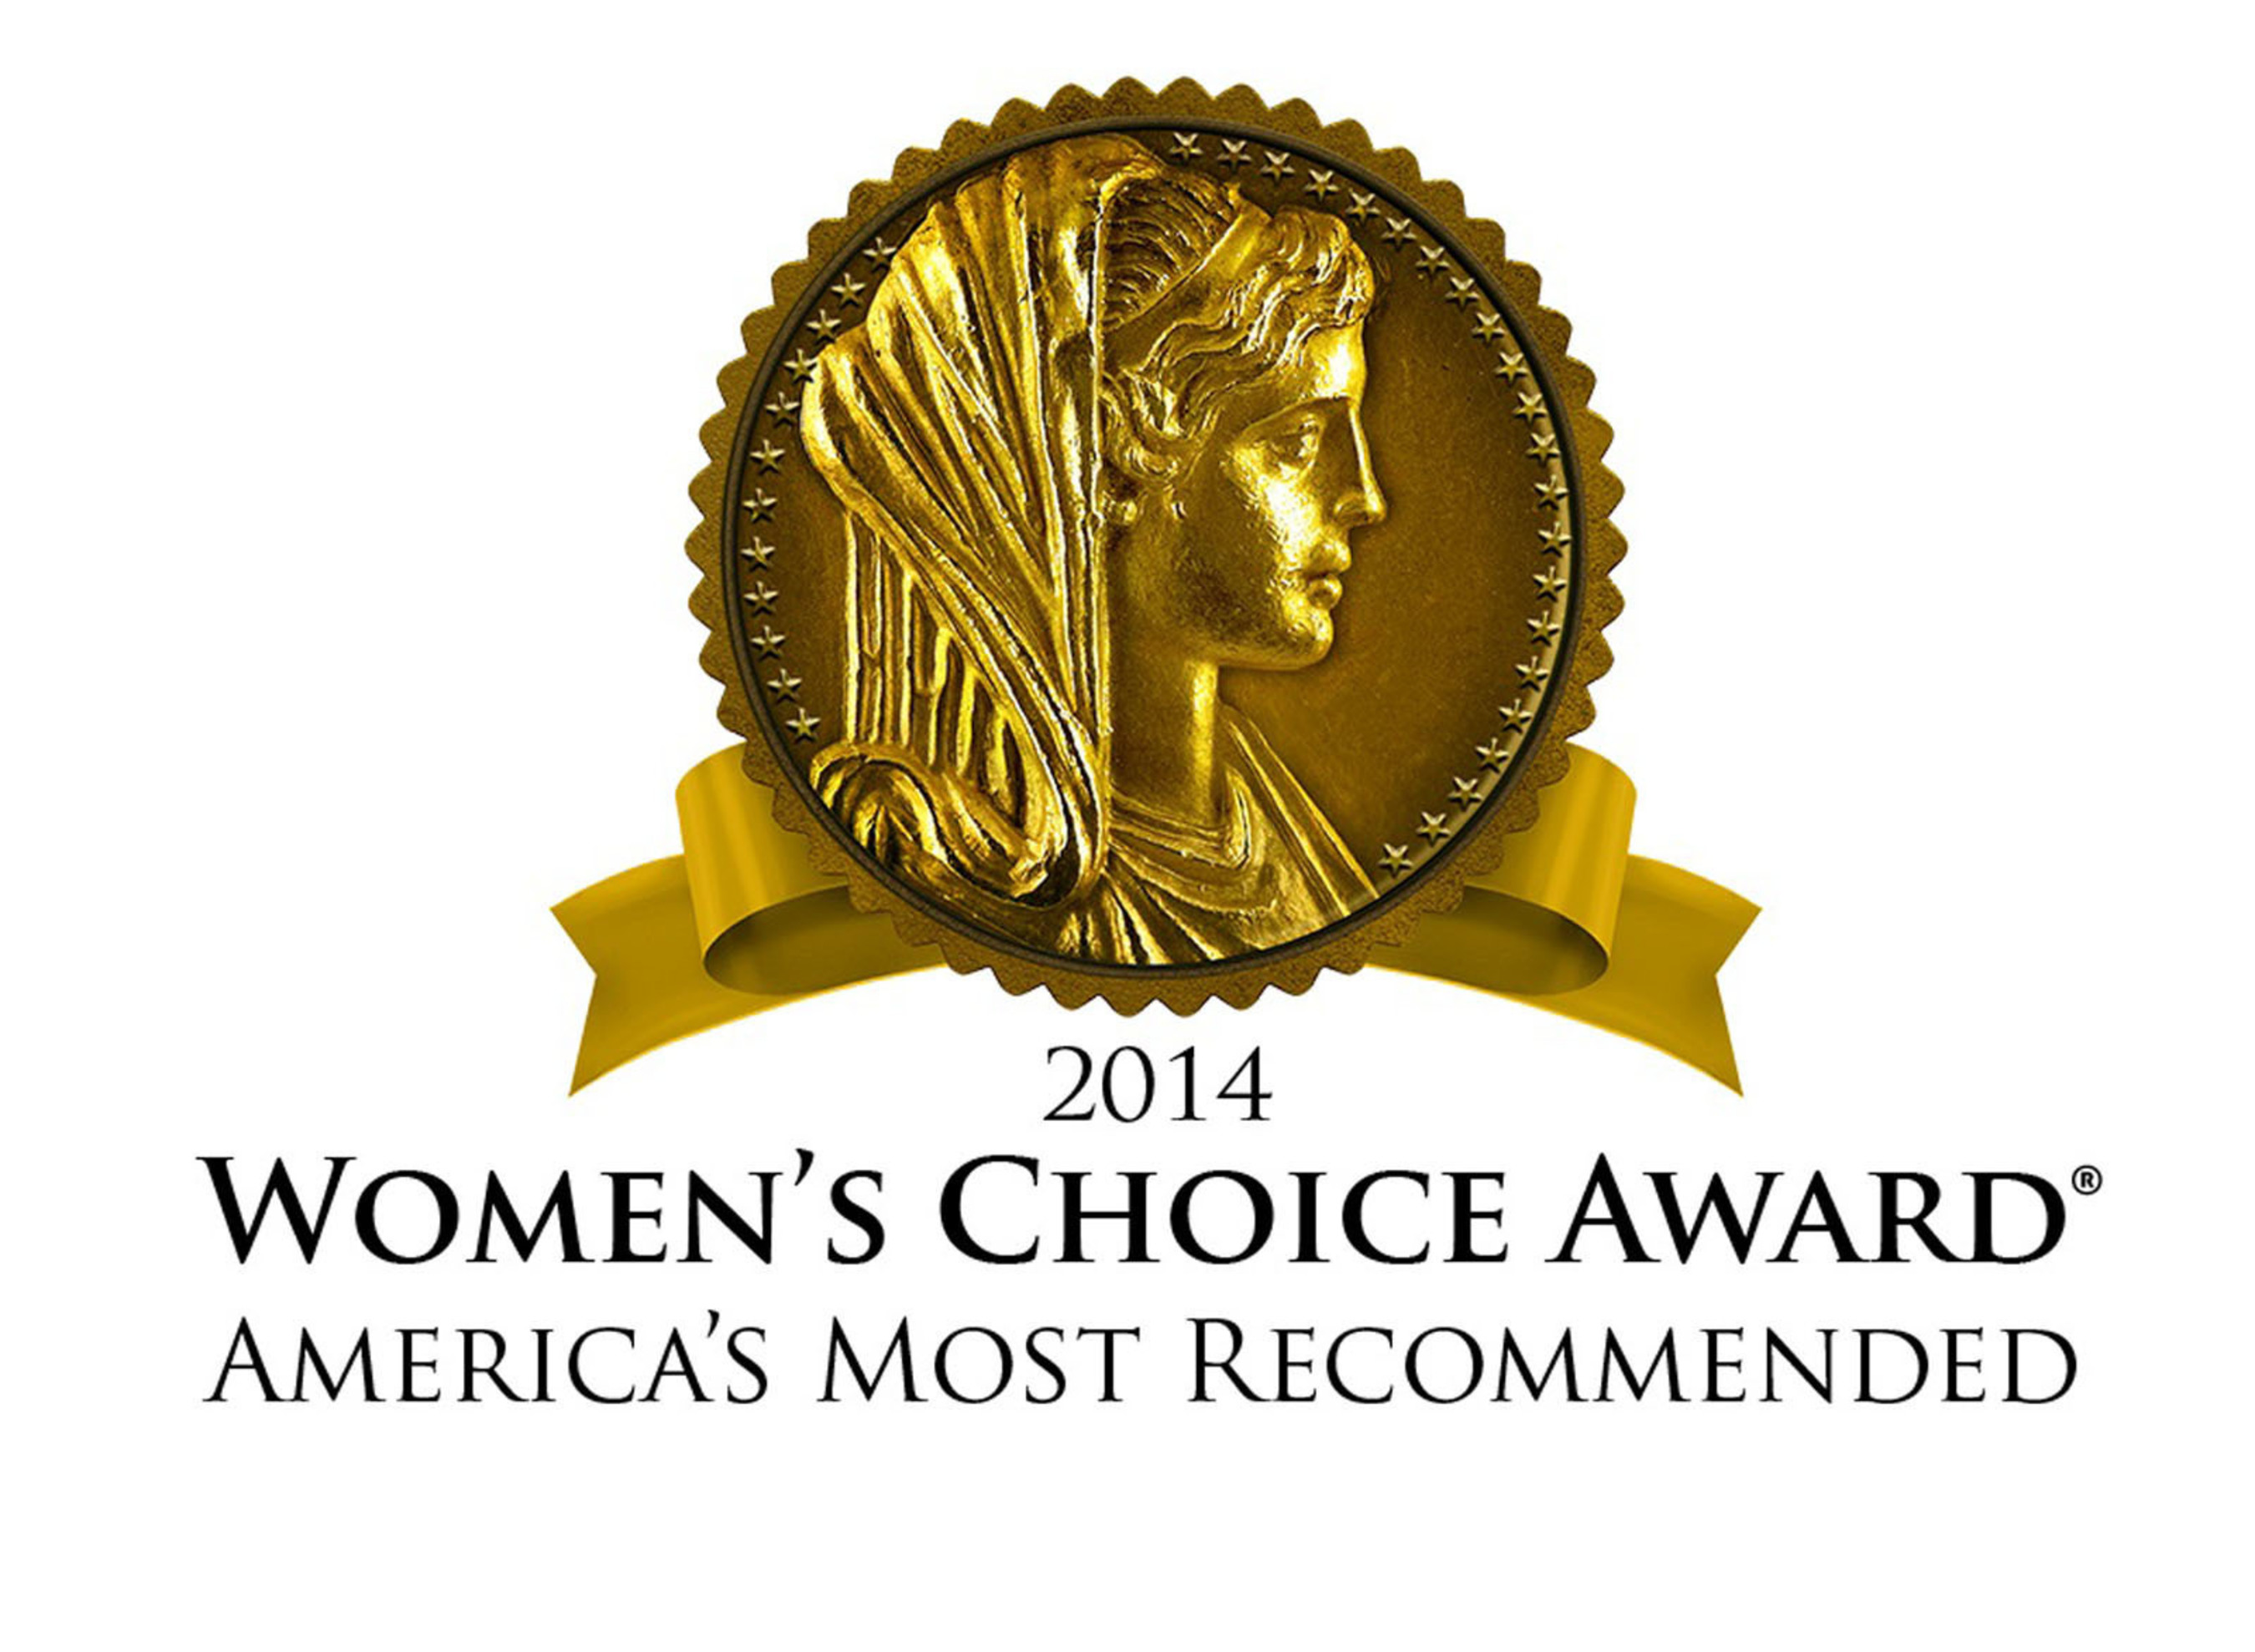 Women's Choice Award Honors Most Recommended Brands According to Women (PRNewsFoto/Women's Choice Award)